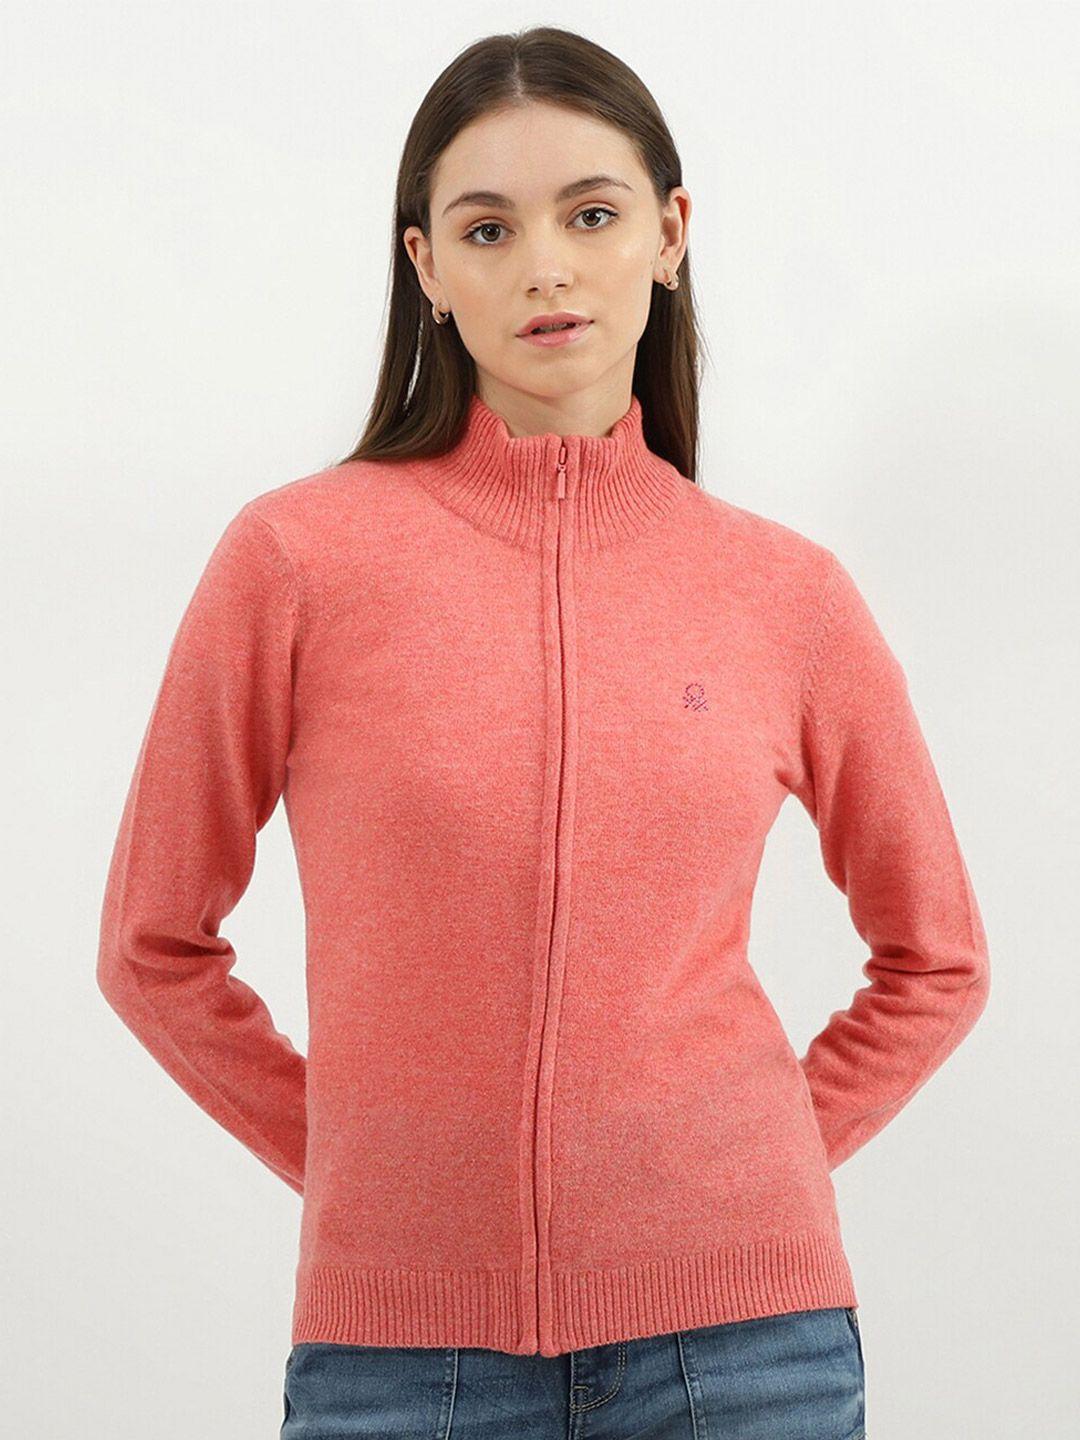 united colors of benetton women pink high neck cardigan